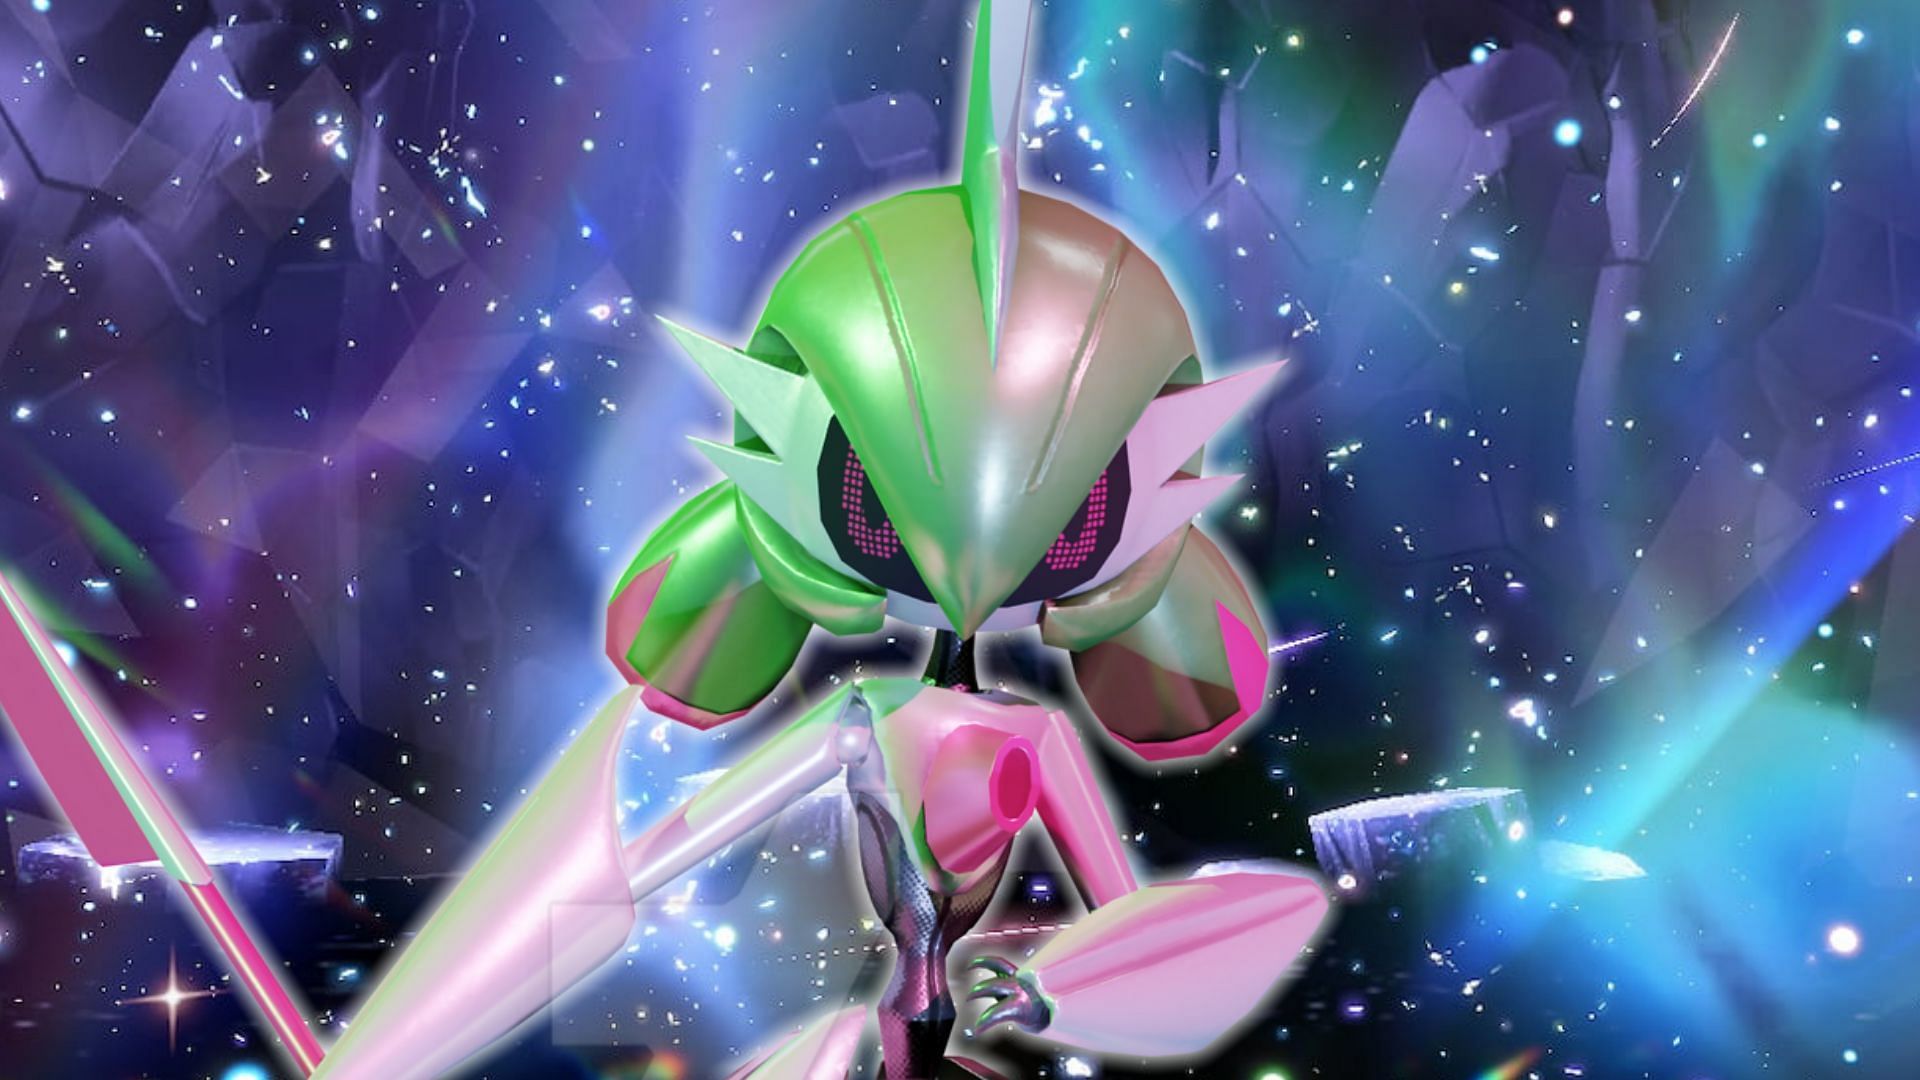 The future form of Gardevoir/Gallade is pretty good